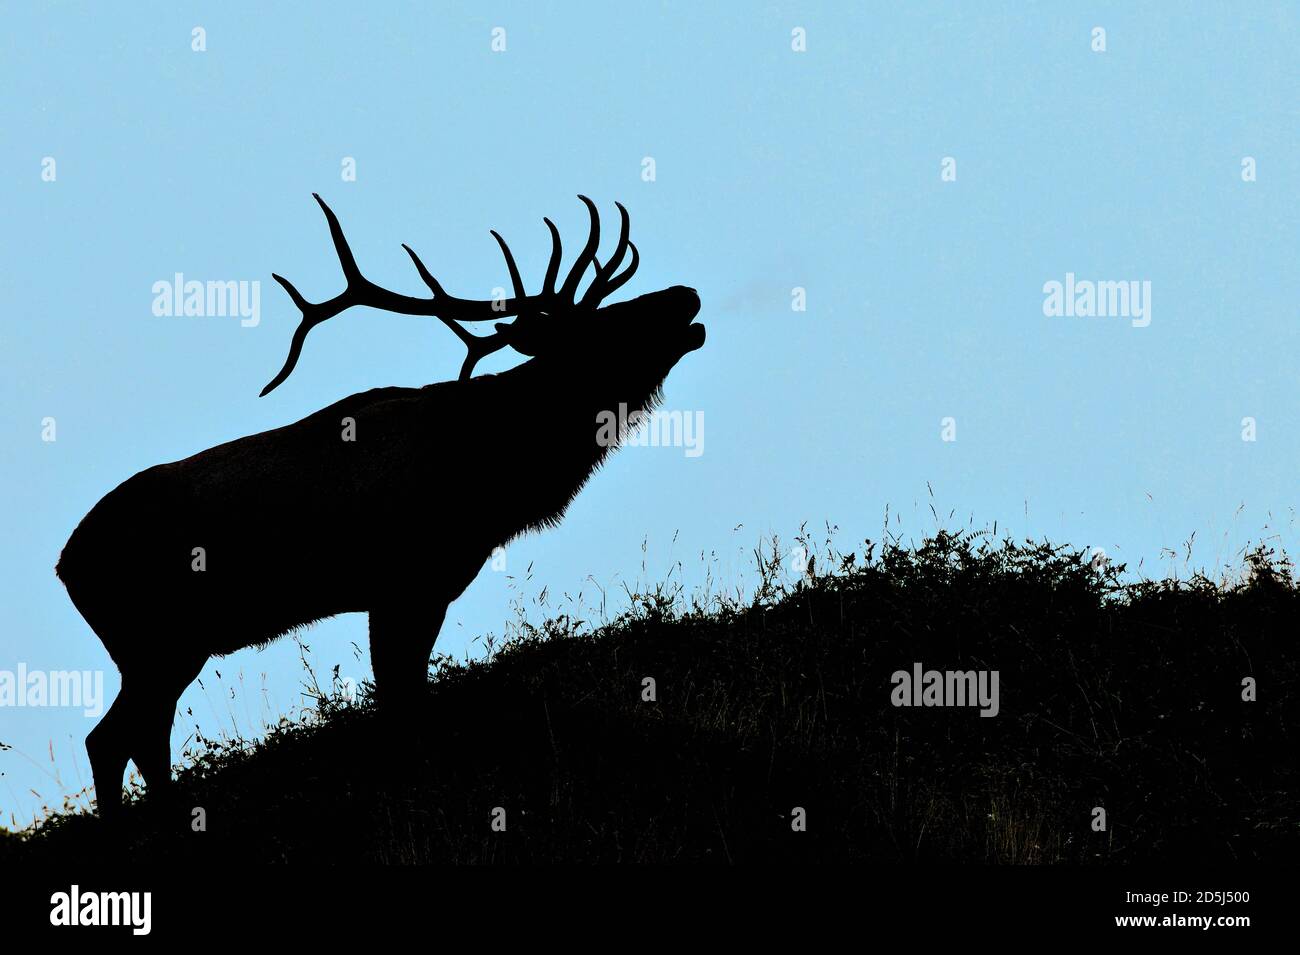 A silhouette image of a large bull elk 'Ovis canadensis', standing on a hilltop, bugling a challenge to another bull elk in rural Alberta Canada Stock Photo